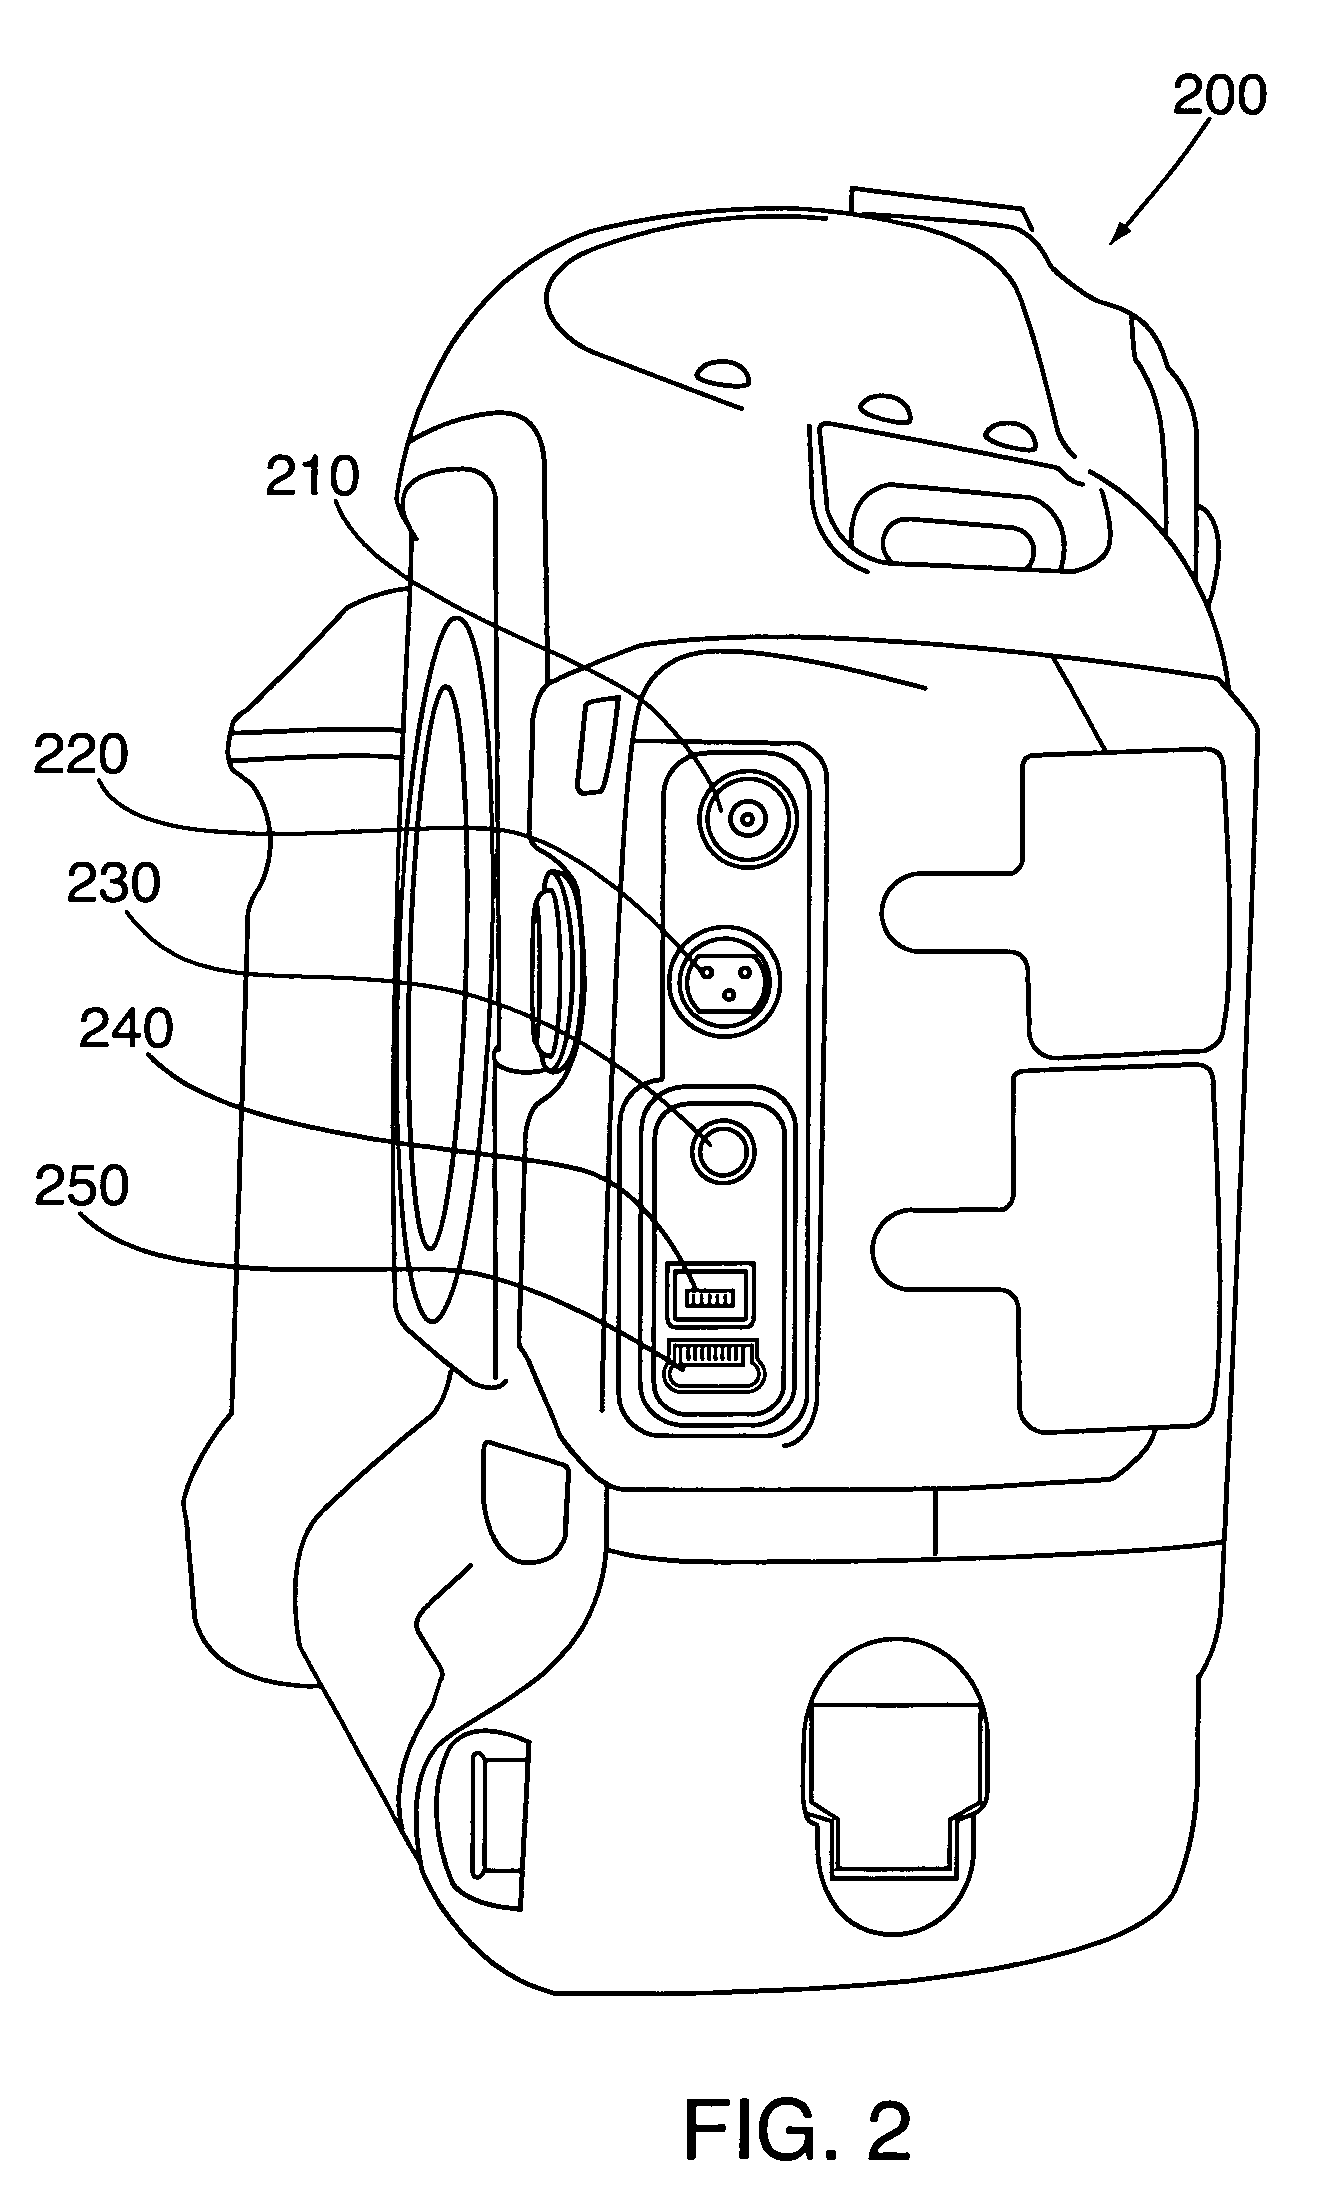 Wireless photographic communication system and method